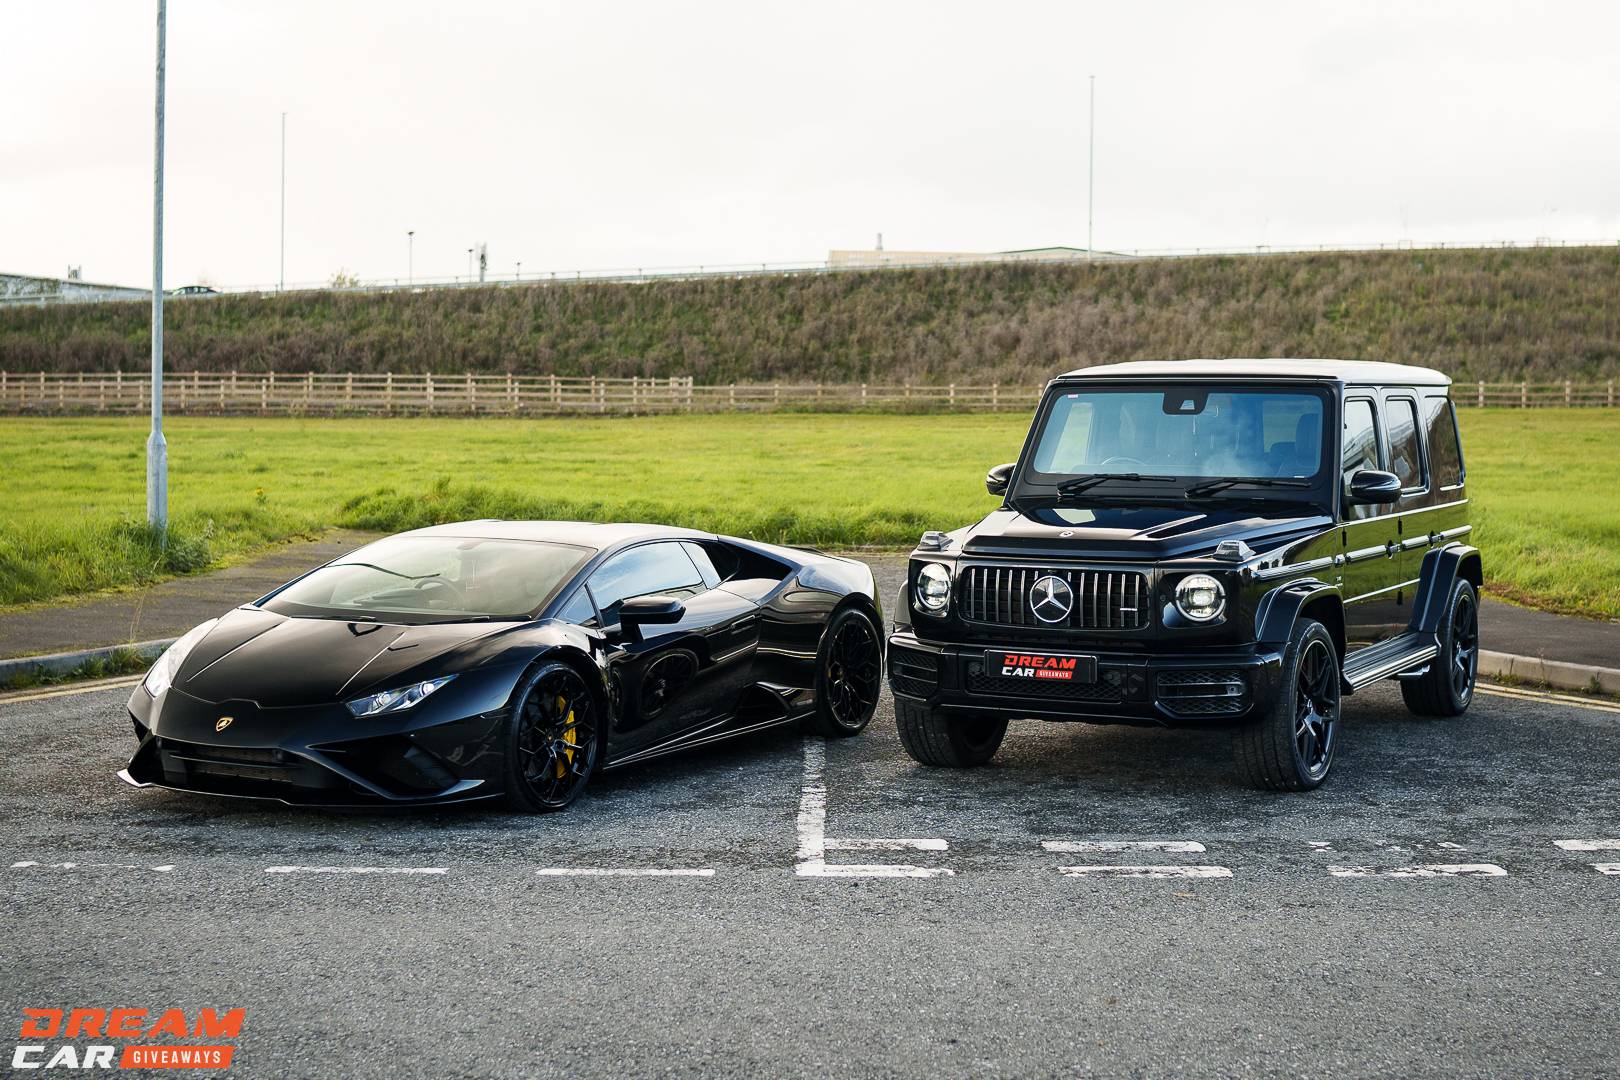 Win this Huracan Evo OR Mercedes-Benz G63 AMG & £10,000 or £140,000 Tax Free